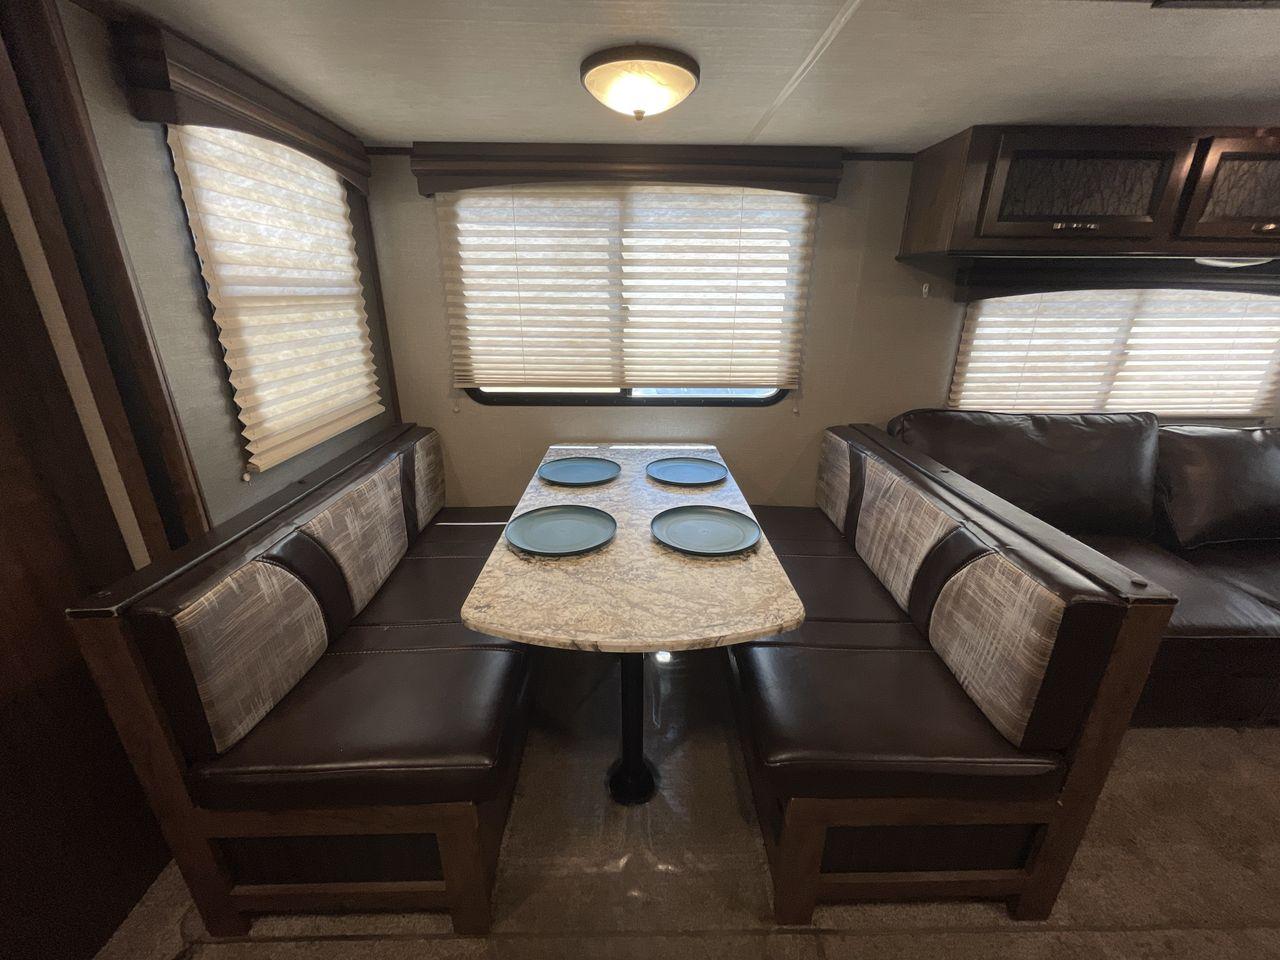 2018 CRUISER RADIANCE 28QD (5RXFB3324J2) , Length: 33.33 ft. | Dry Weight: 6,025 lbs. | Gross Weight: 9,600 lbs. | Slides: 1 transmission, located at 4319 N Main St, Cleburne, TX, 76033, (817) 678-5133, 32.385960, -97.391212 - The 2018 Cruiser RV Radiance 28QD seamlessly blends style, comfort, and functionality to redefine your camping experience. Measuring 33 feet in length, this RV is designed for spacious and lightweight towing. The aluminum frame construction ensures durability while maintaining a manageable weight fo - Photo #14